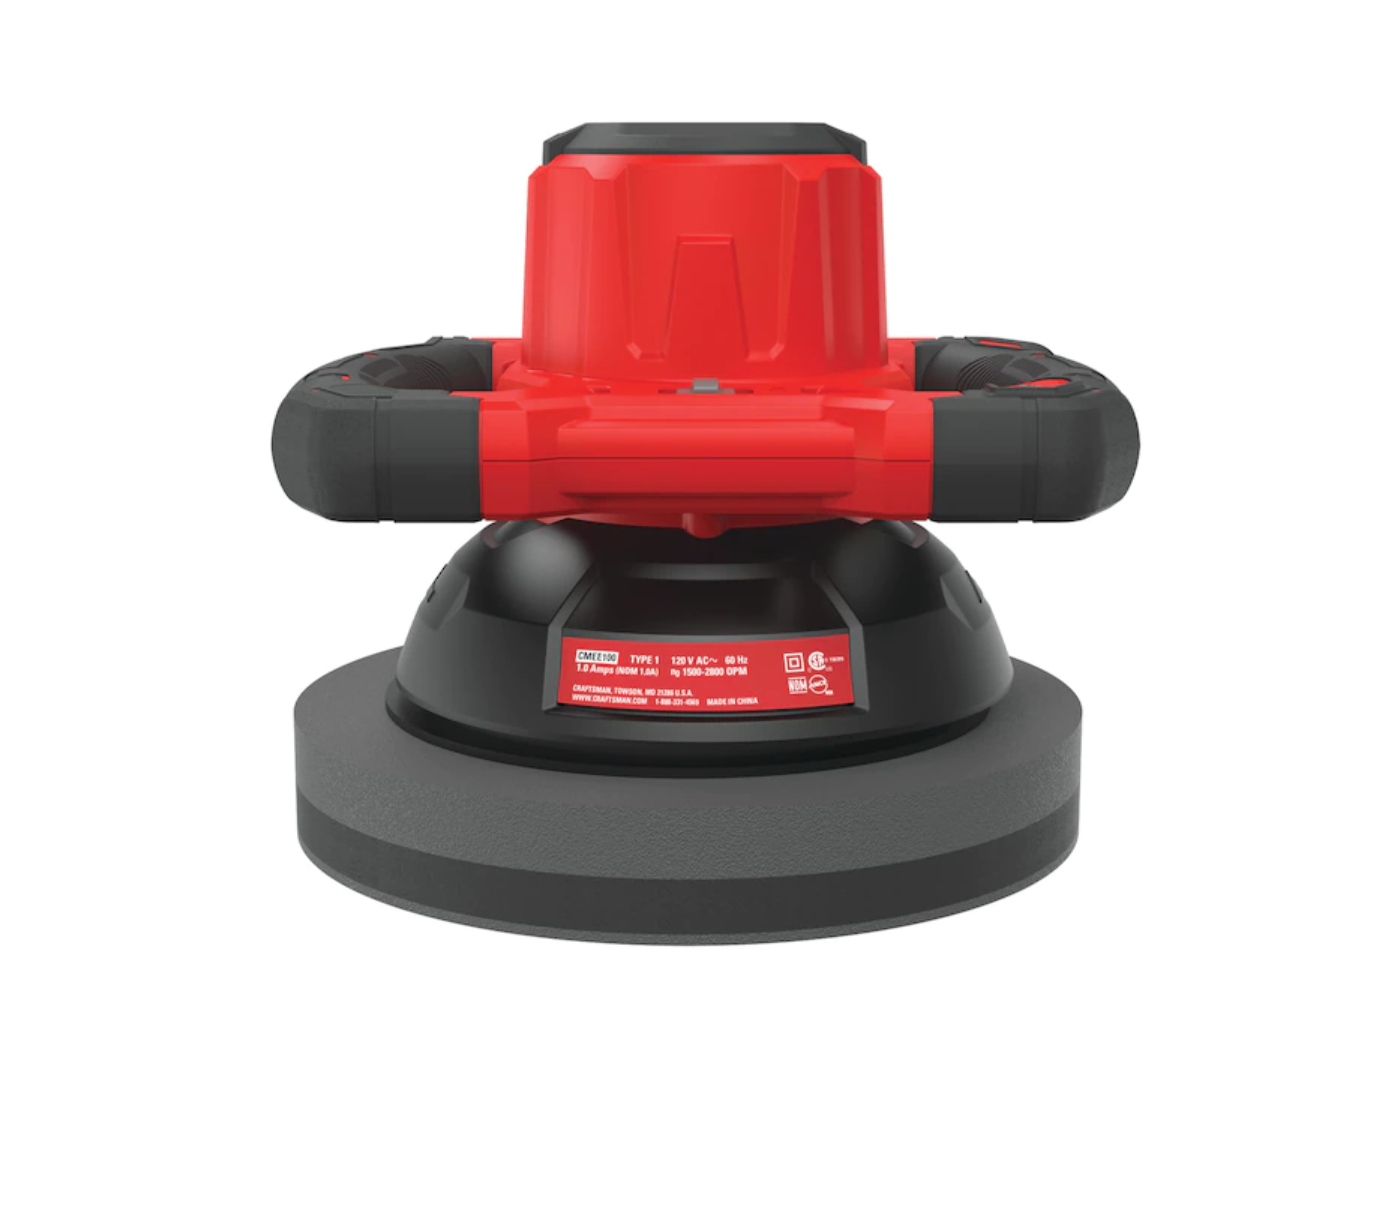 CRAFTSMAN CMEE100 10-in Variable Speed Corded Polisher